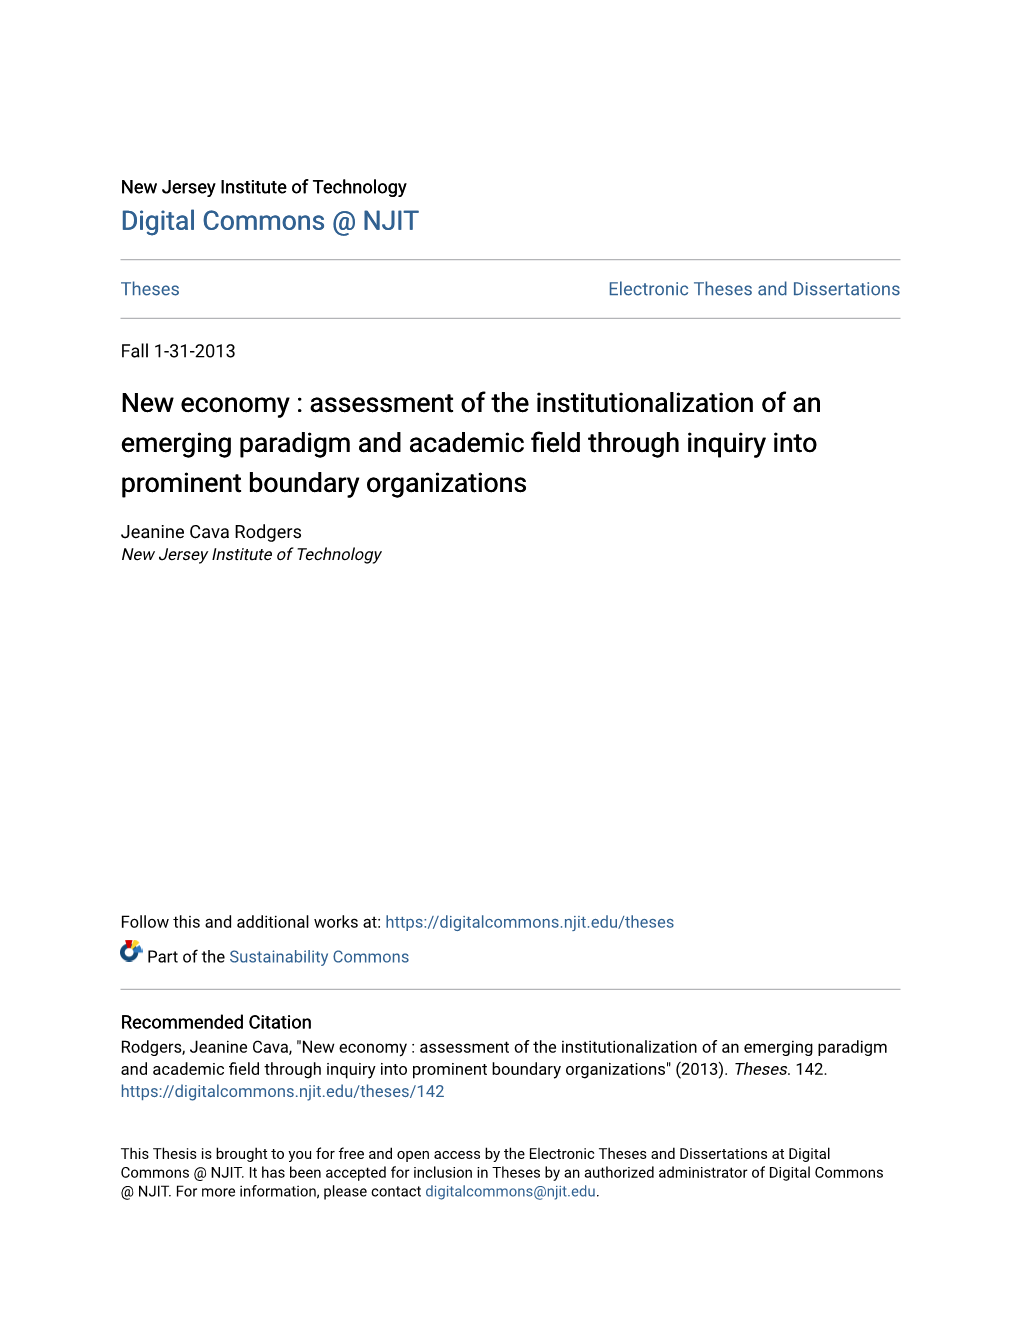 New Economy : Assessment of the Institutionalization of an Emerging Paradigm and Academic Field Through Inquiry Into Prominent Boundary Organizations